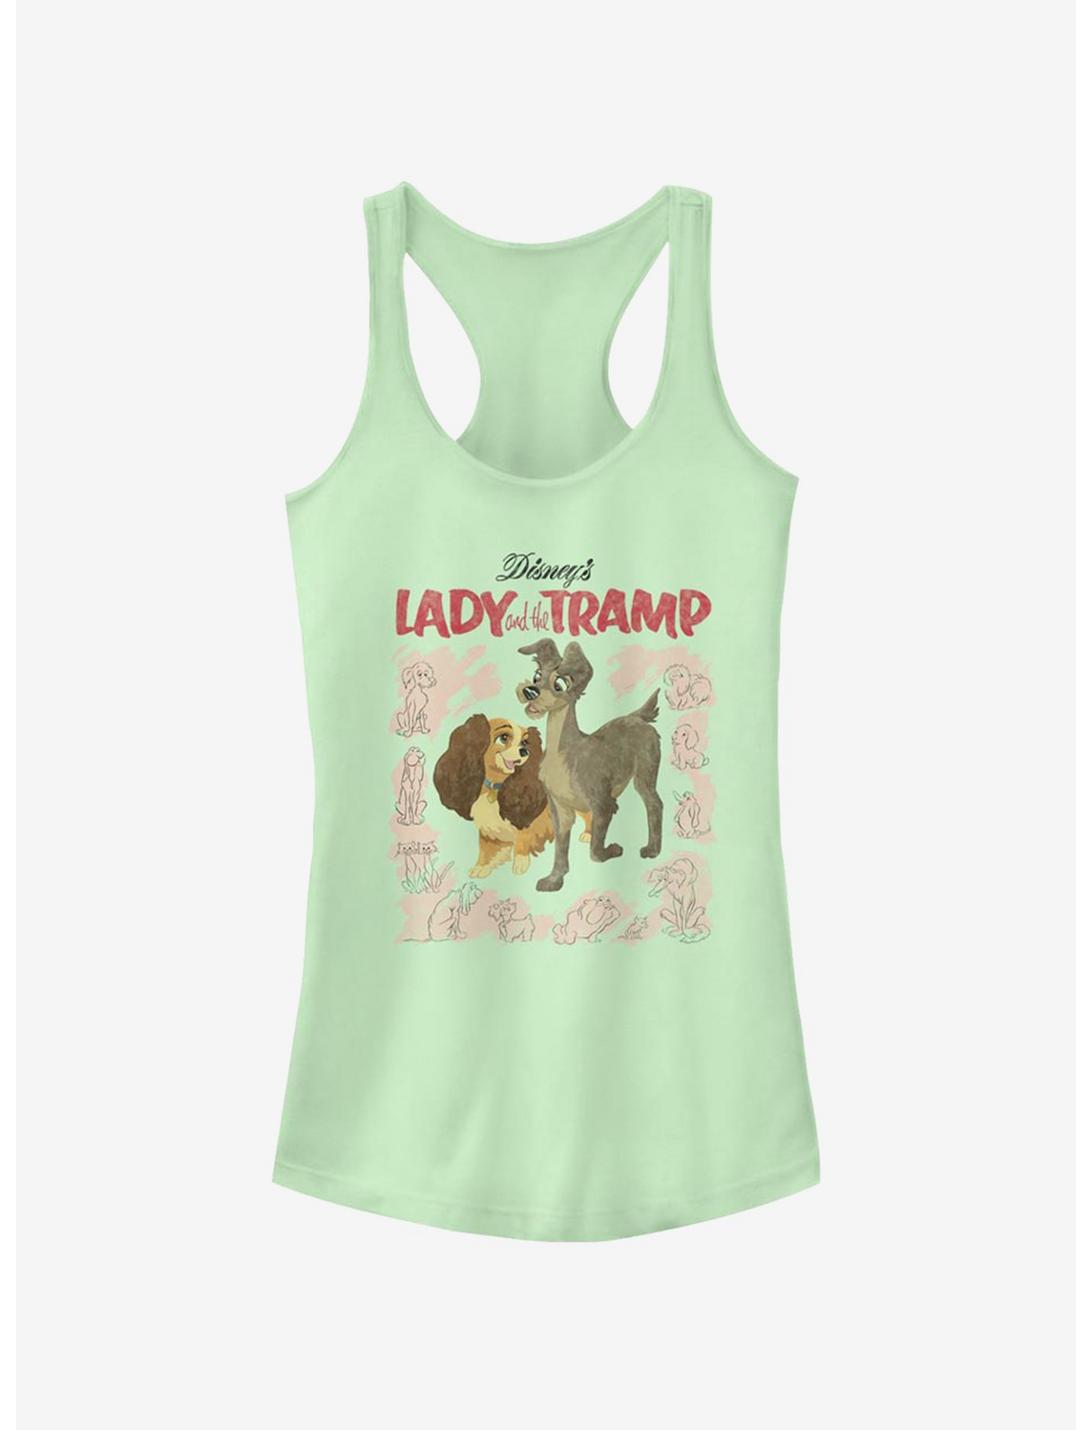 Disney Lady And The Tramp Vintage Cover Girls Tank, MINT, hi-res